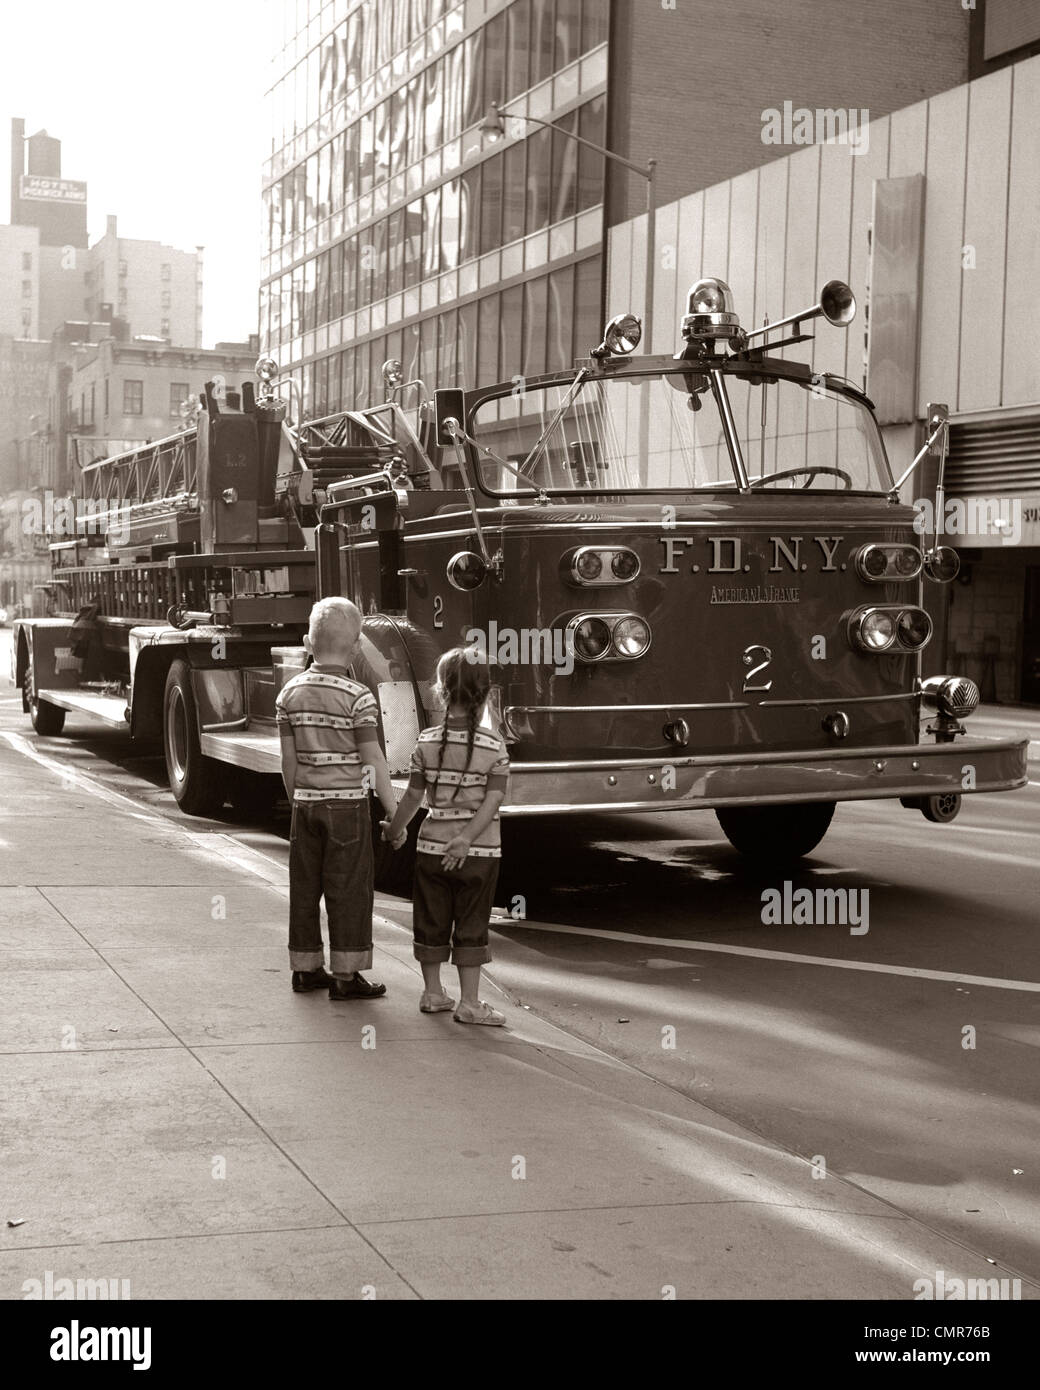 1970s 2 CHILDREN BOY GIRL HOLDING HANDS LOOKING AT FIRE TRUCK PARKED ON STREET NEW YORK CITY Stock Photo